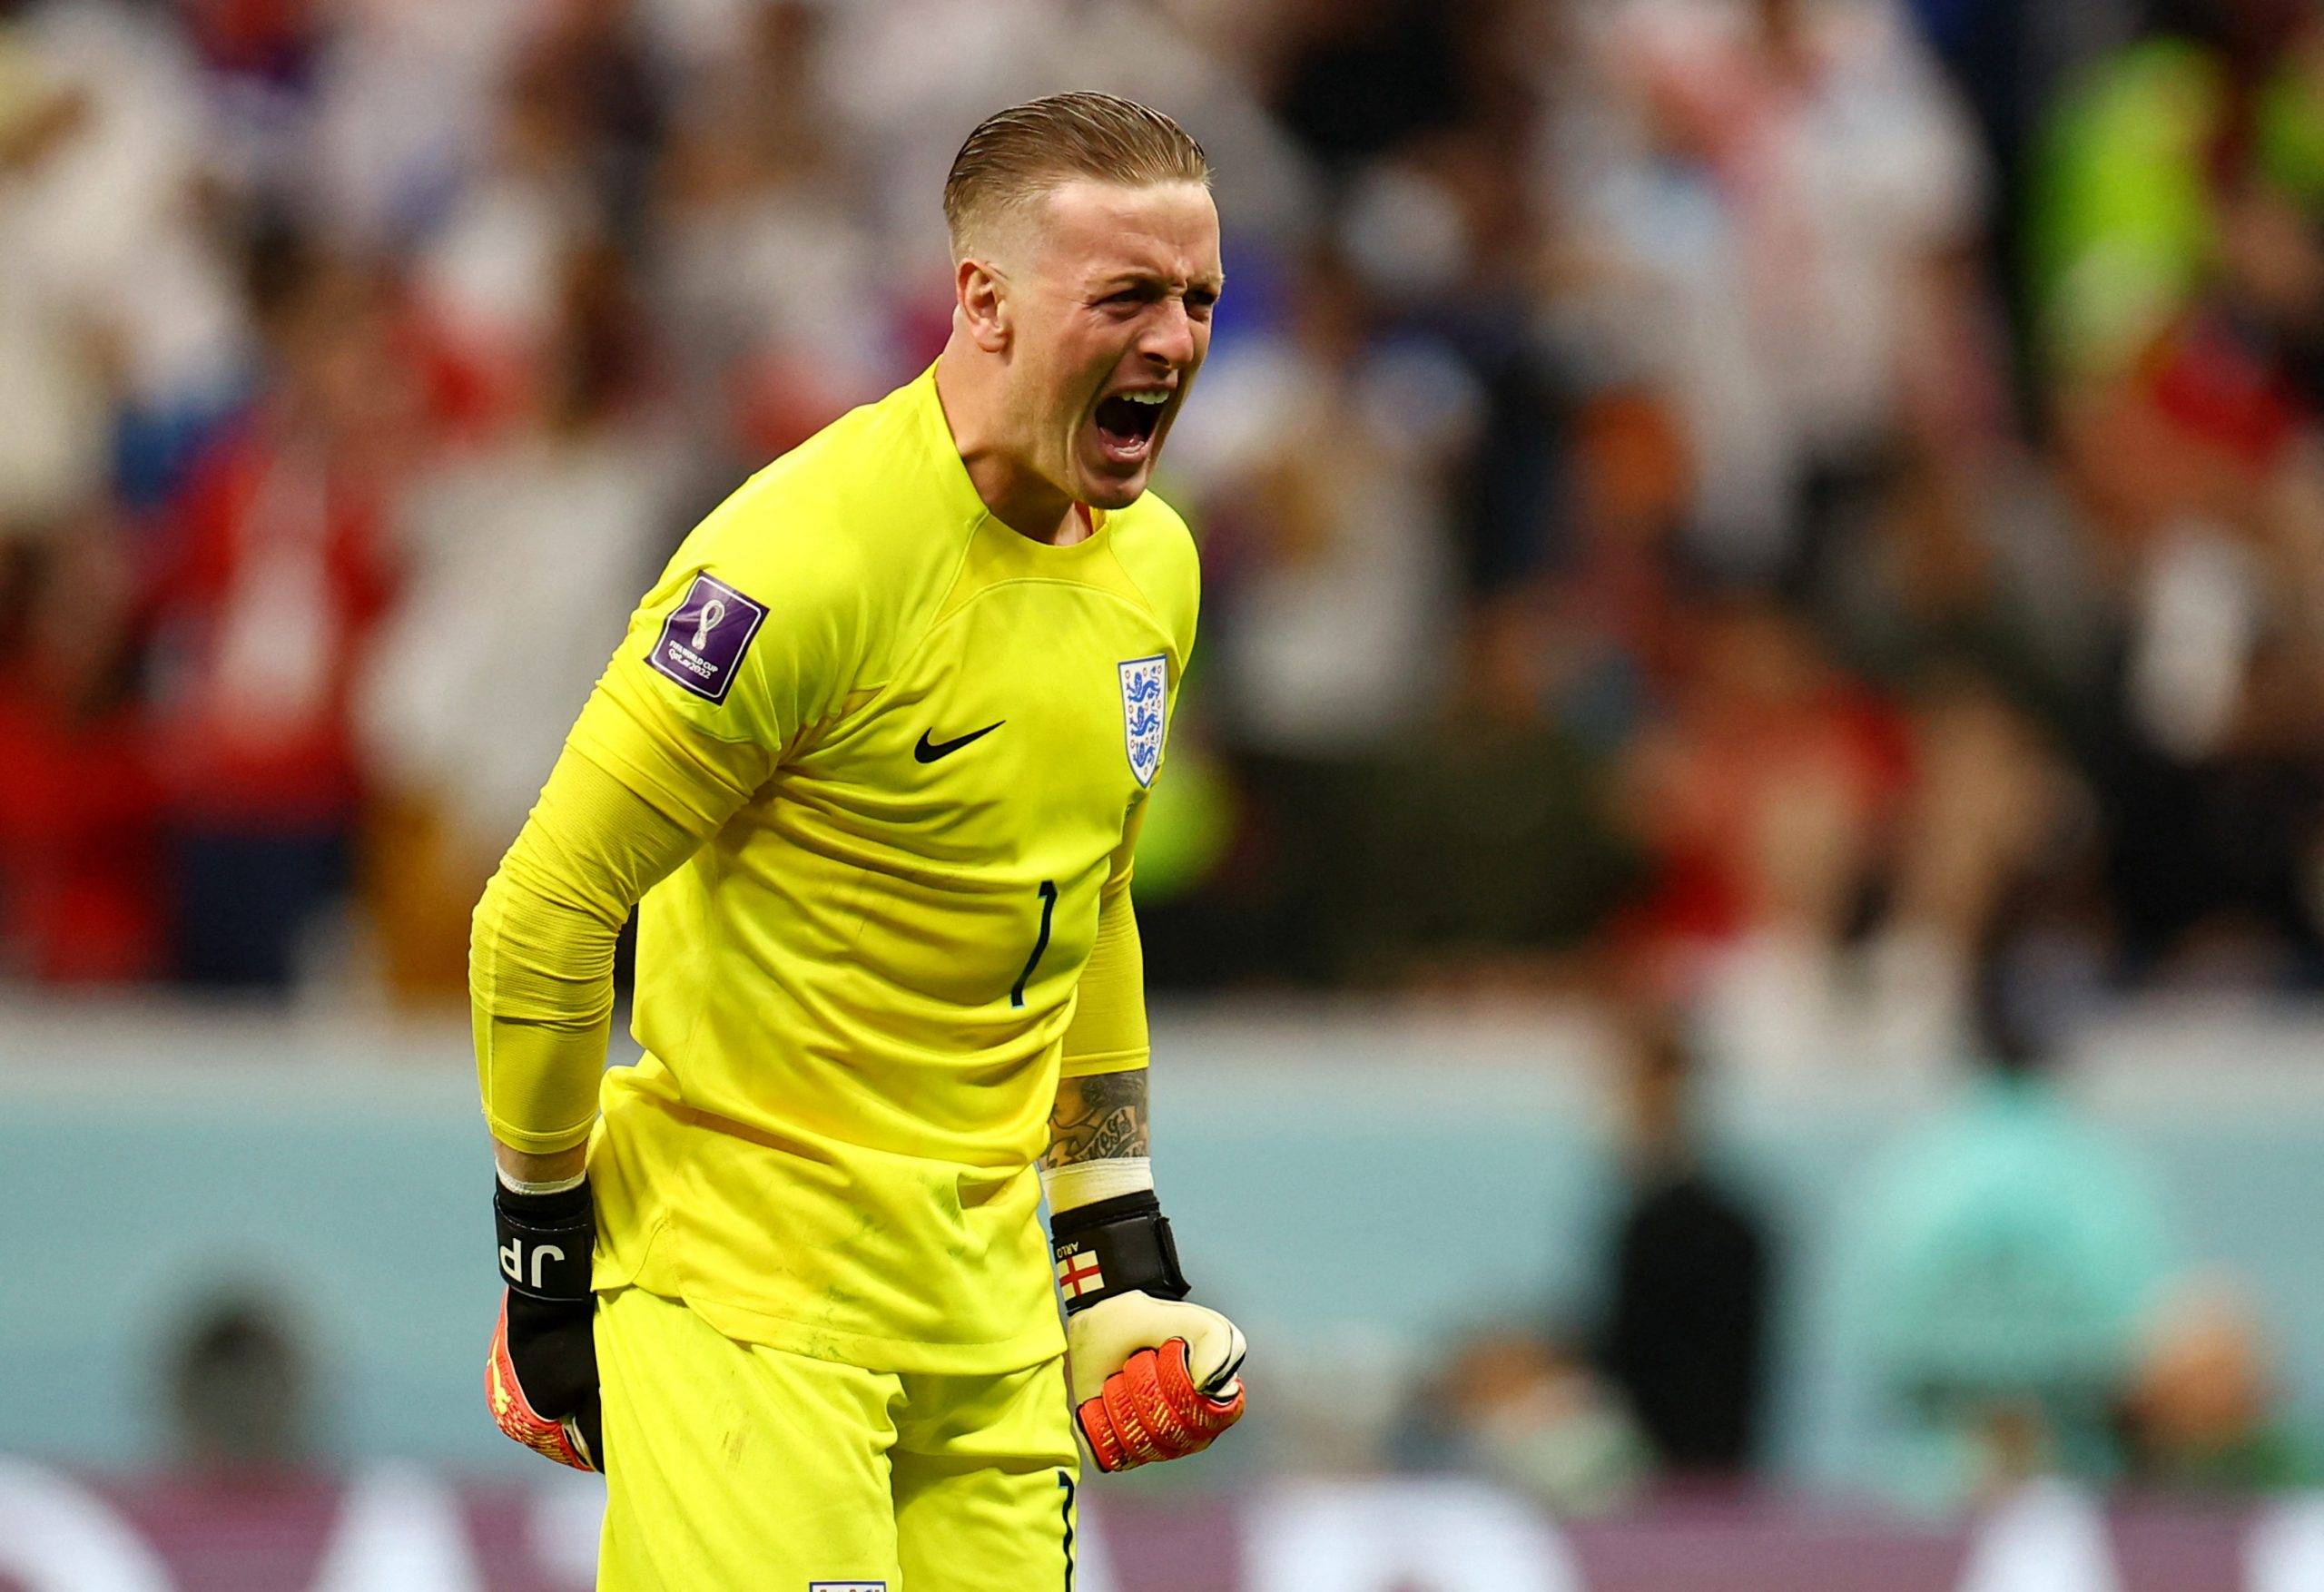 Tottenham: Club should've signed Pickford claims McManus - Follow up